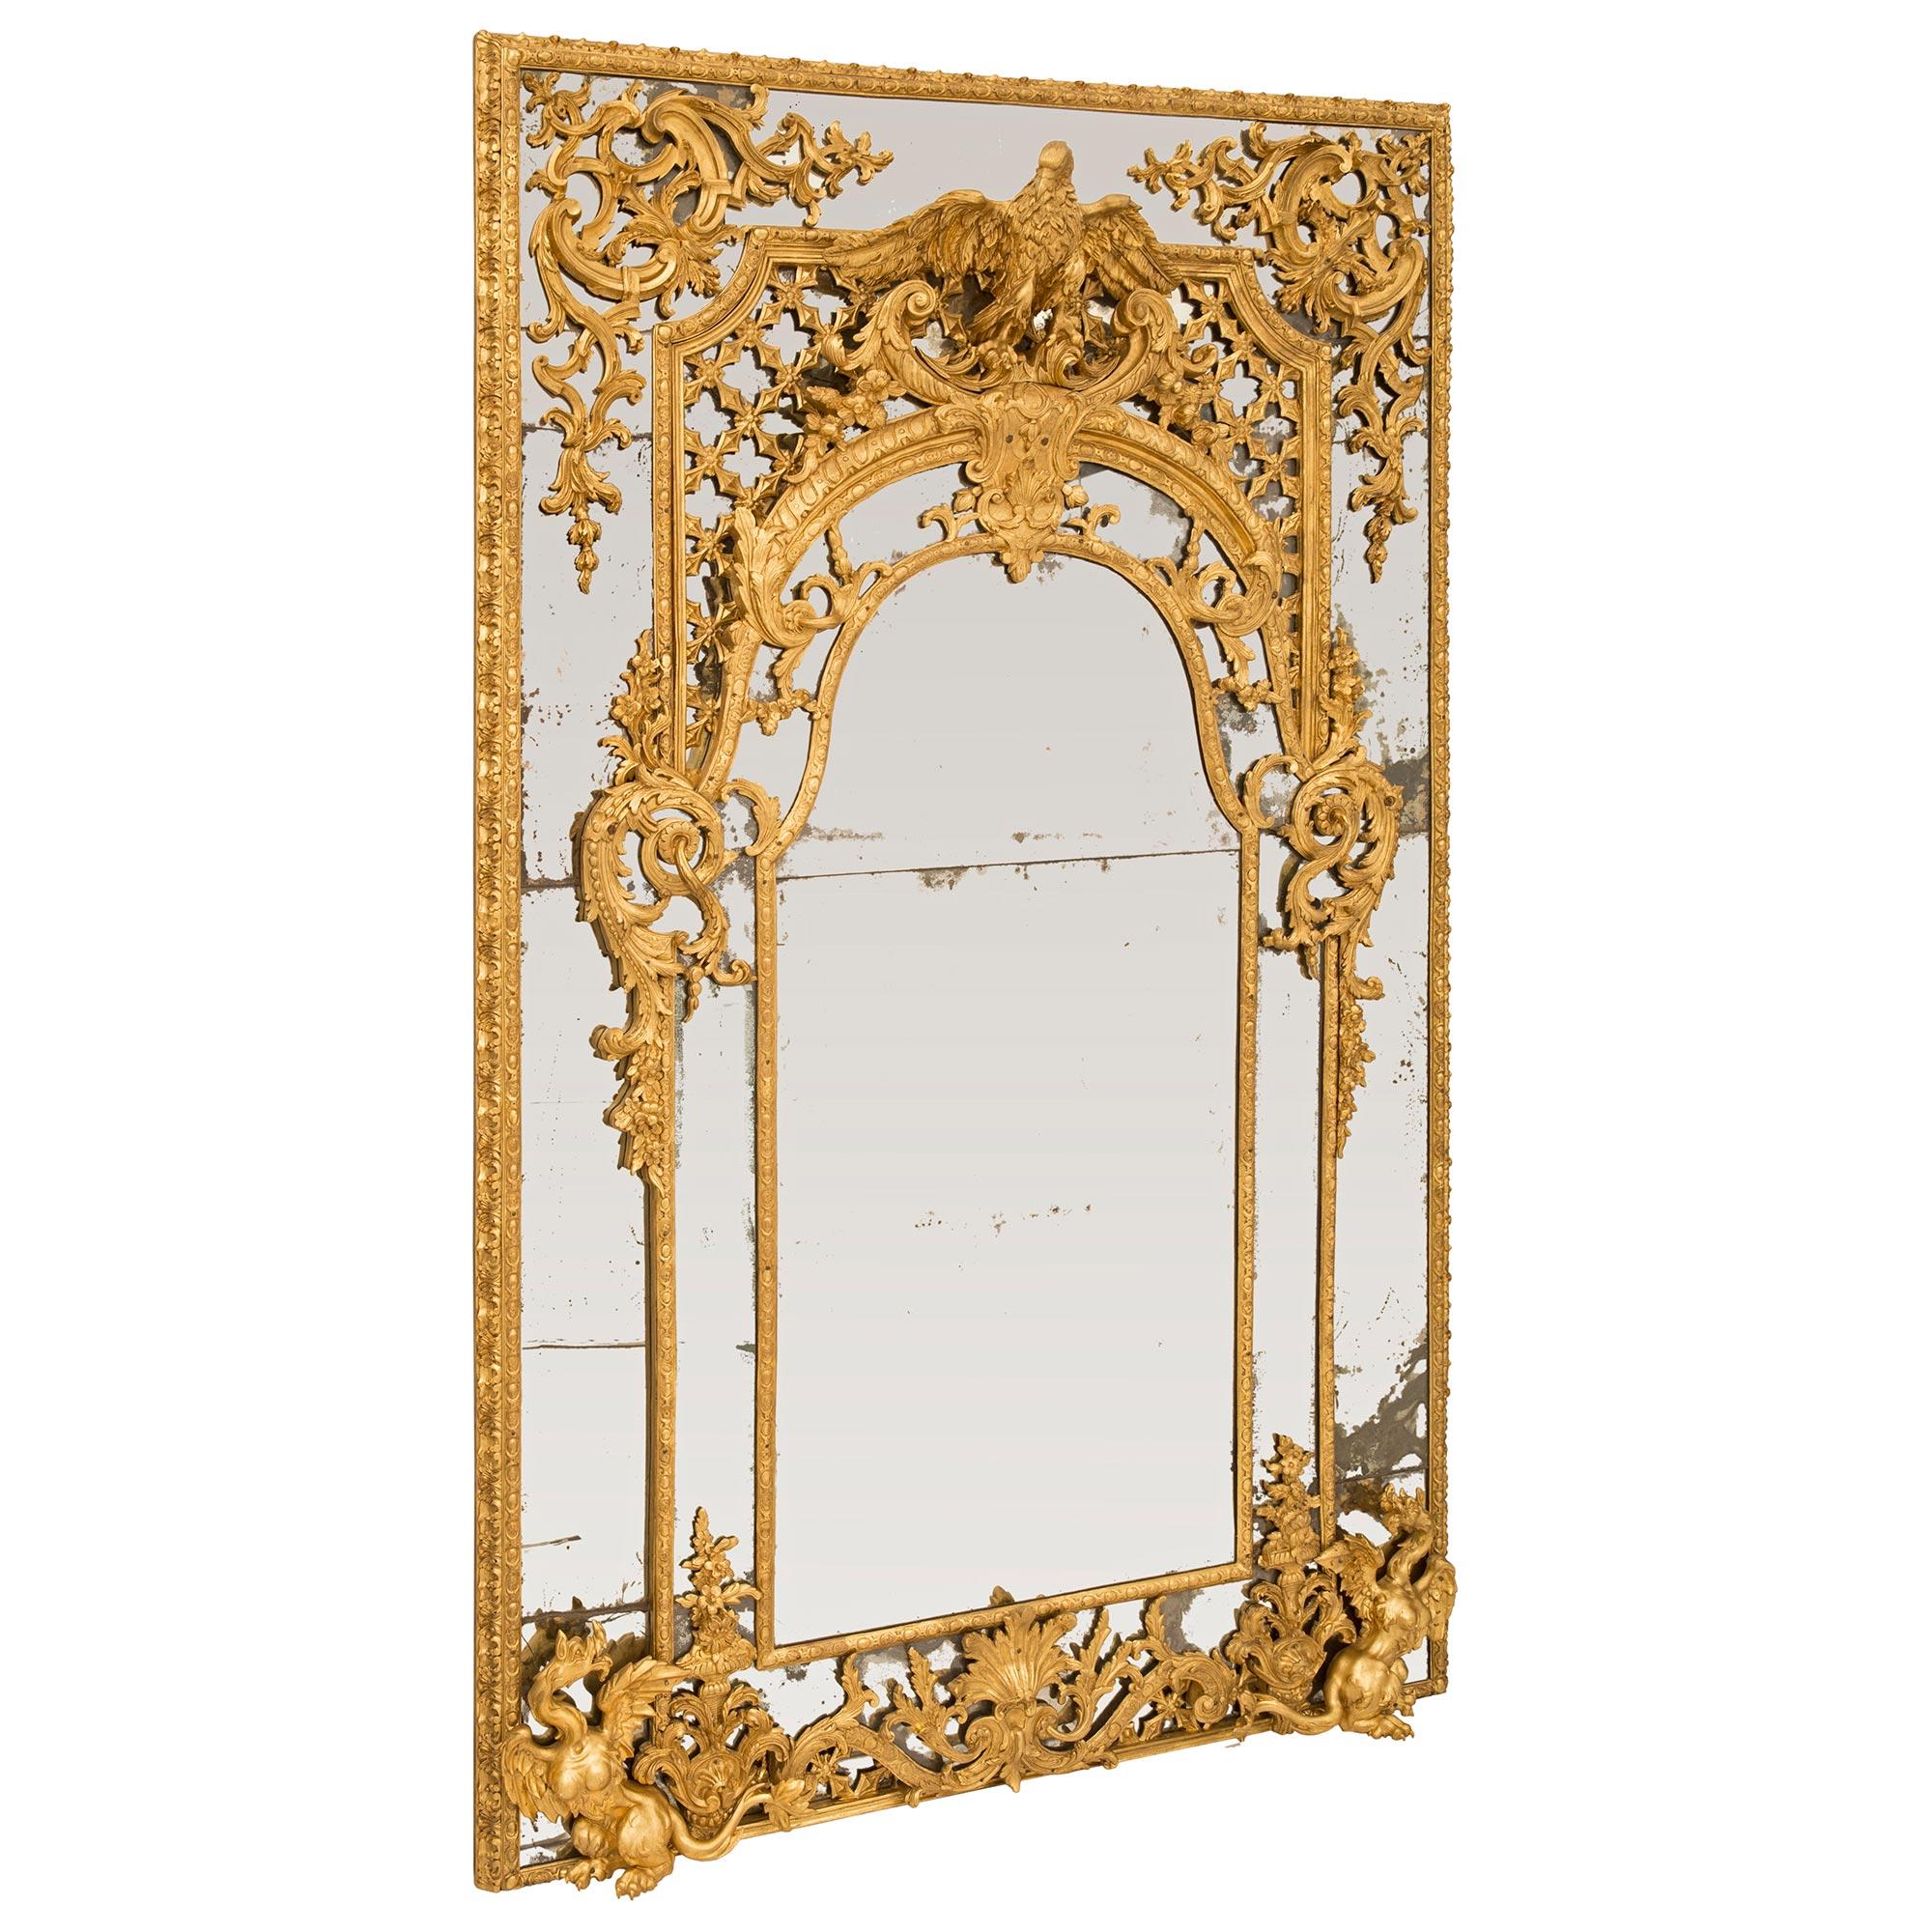 Italian 17th Century Louis XIV Period Double Framed Giltwood Mirror In Good Condition For Sale In West Palm Beach, FL